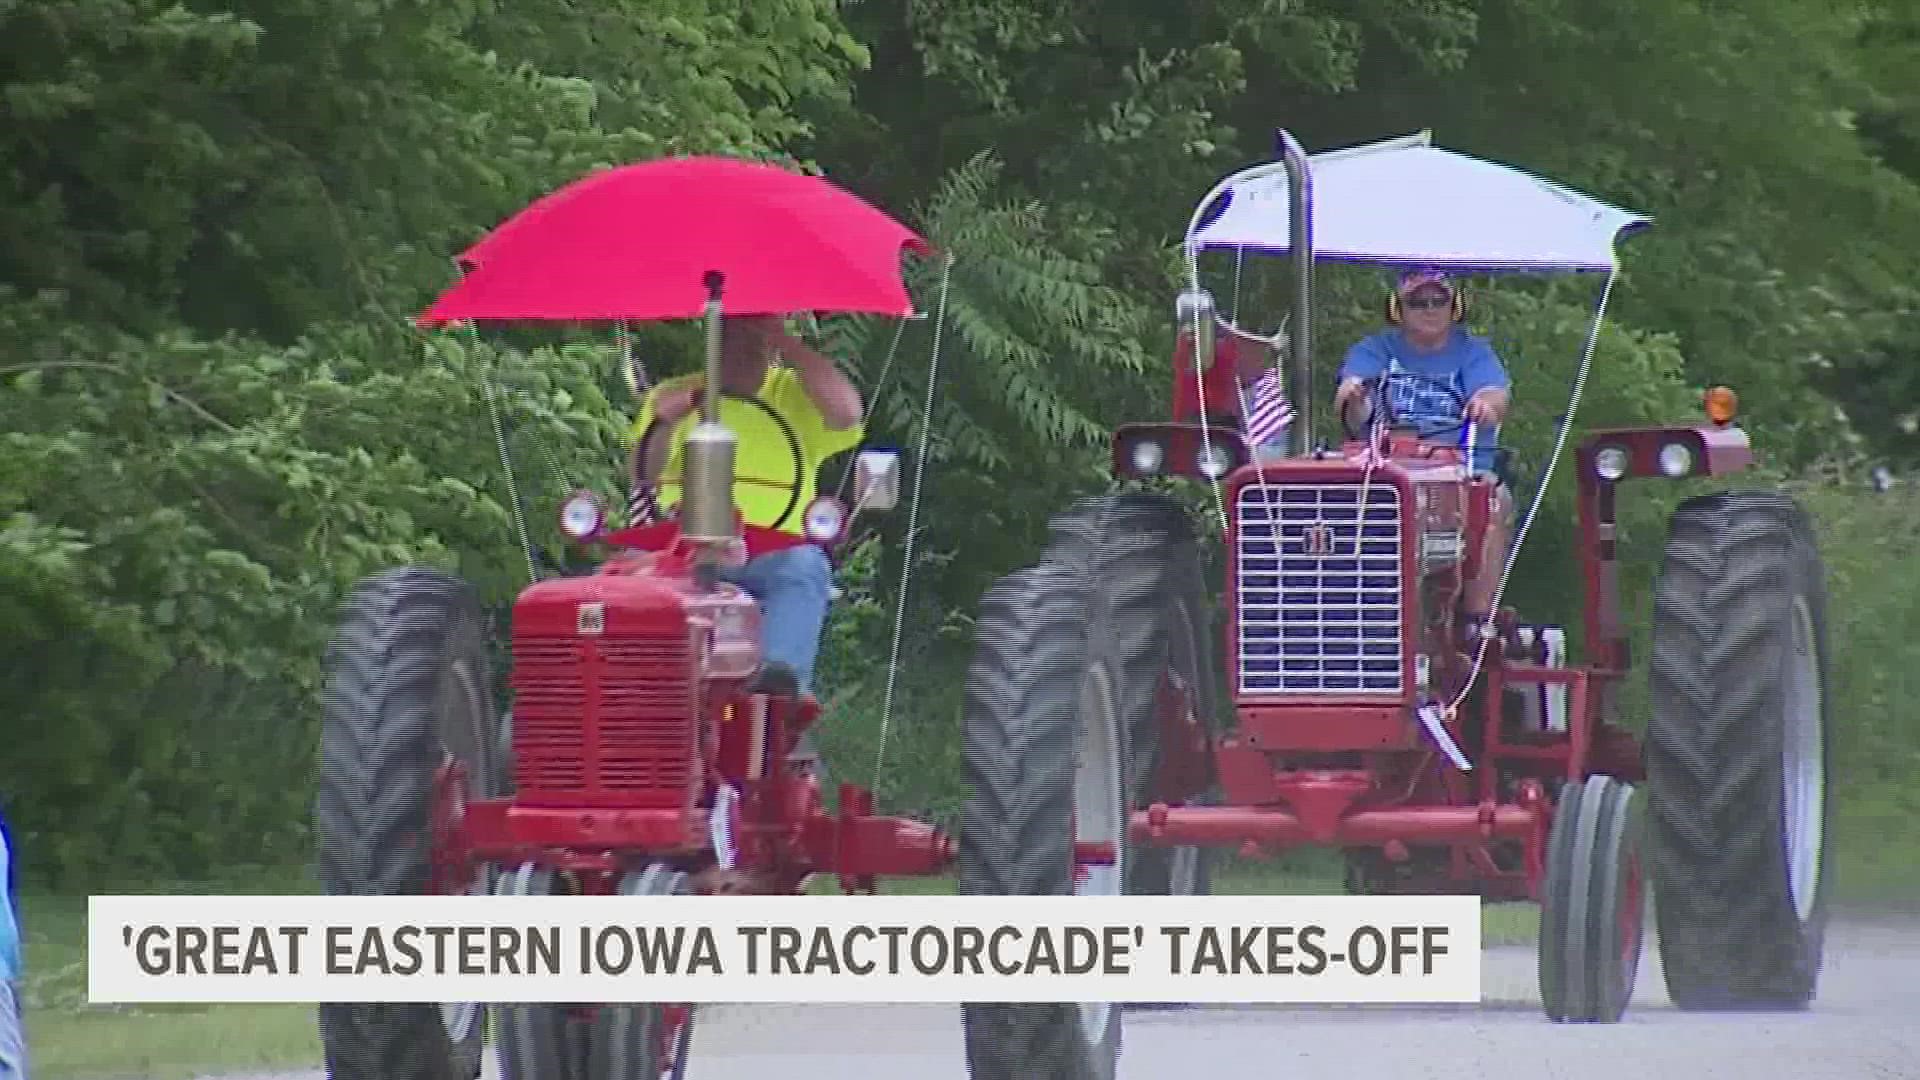 Tractorcade parading tractors around Eastern Iowa this week